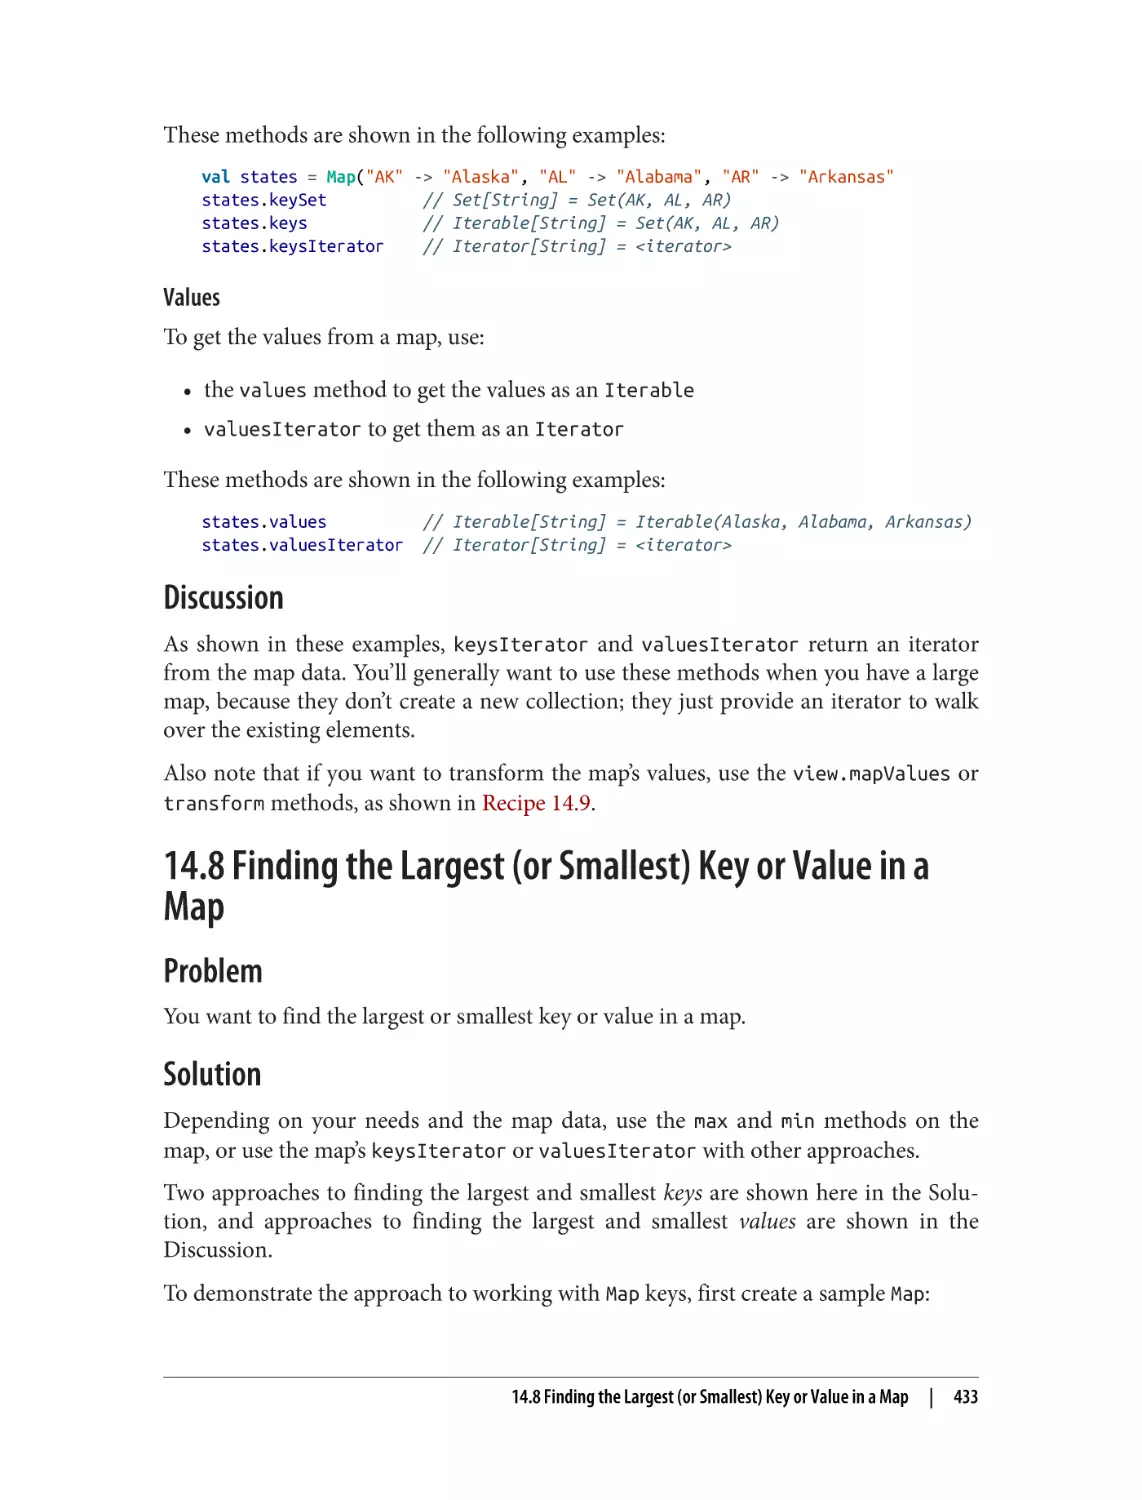 Discussion
14.8 Finding the Largest (or Smallest) Key or Value in a Map
Problem
Solution